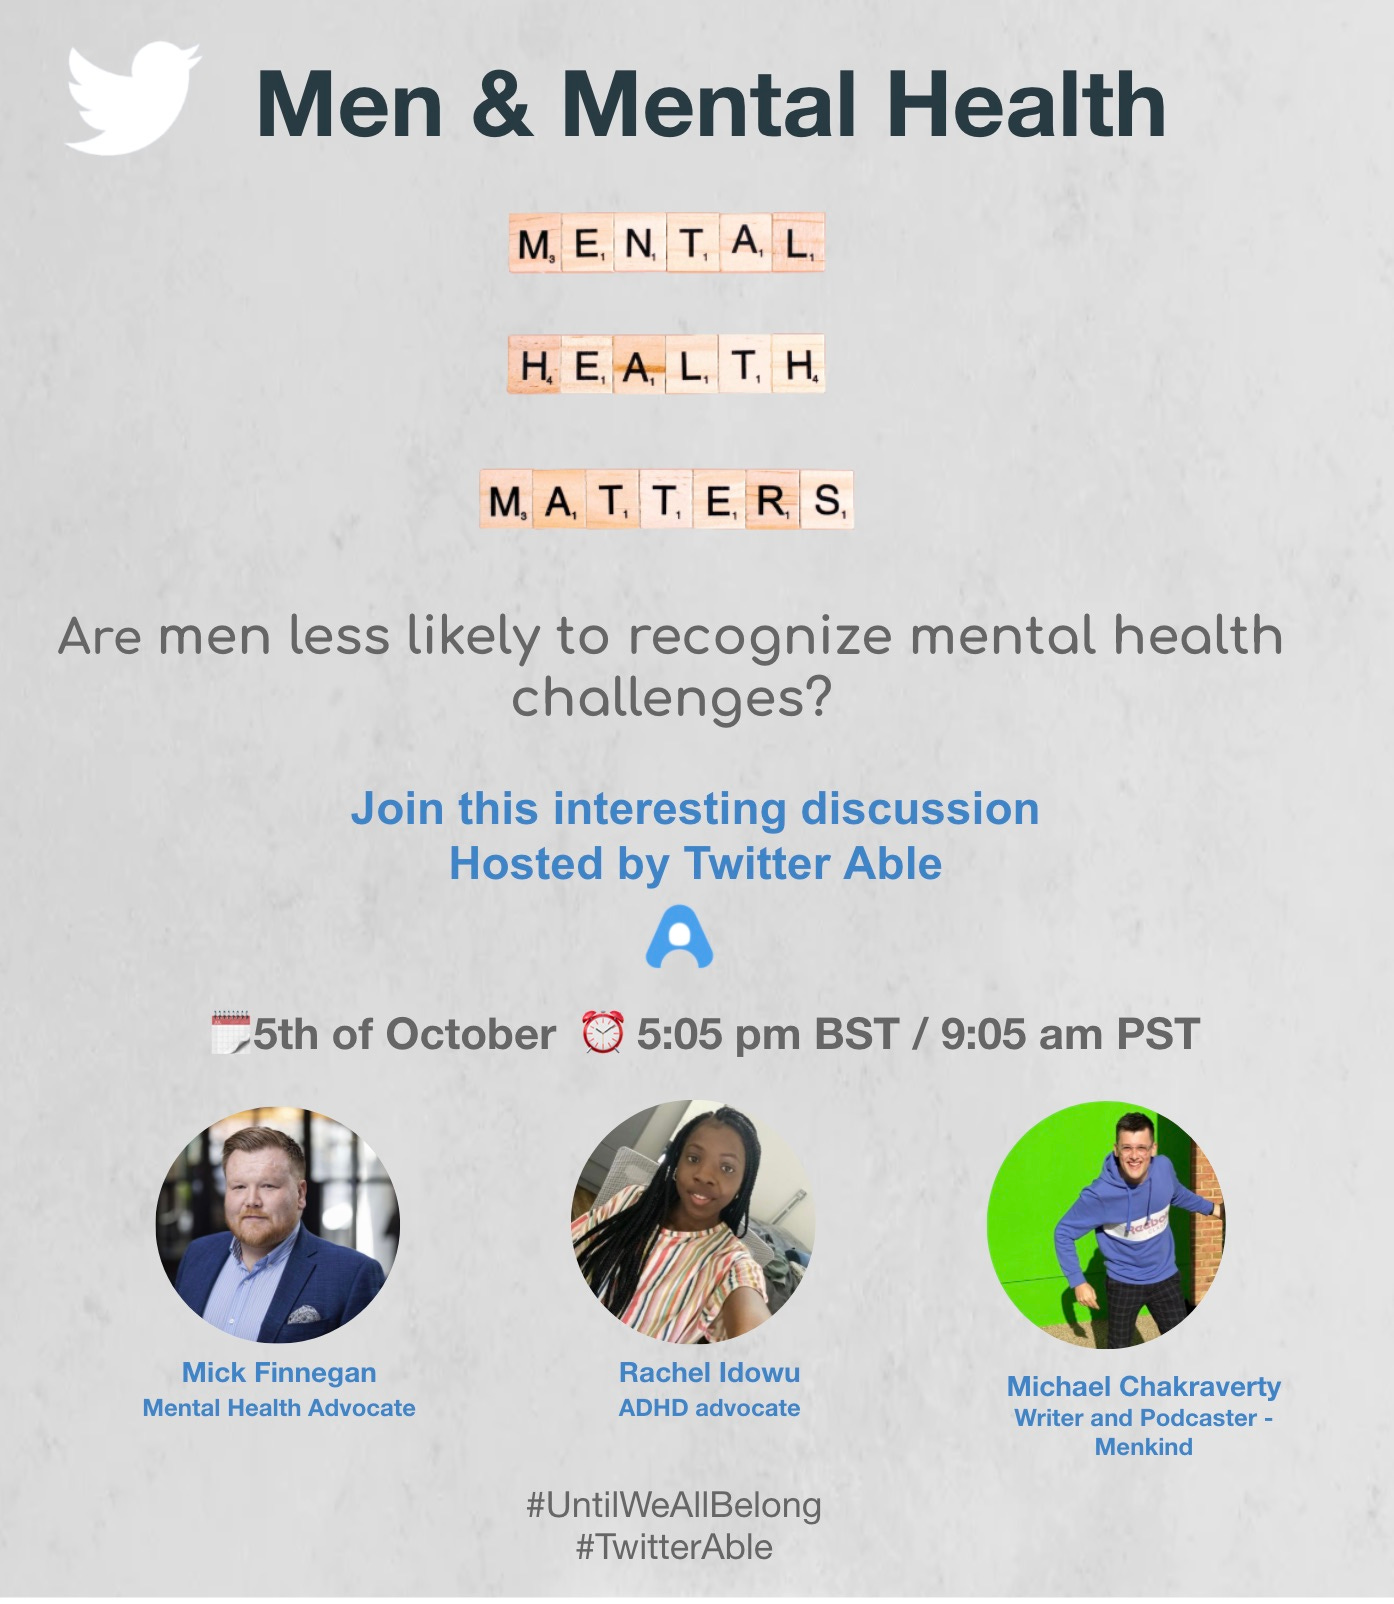 A flyer for the Twitter event on ‘Men and Mental Health’. The flyer includes images of the three panellists, Mick Finnegan (Mental Health Advocate), myself, and Micahel Chakravery (Writer and Podcaster - Menkind)